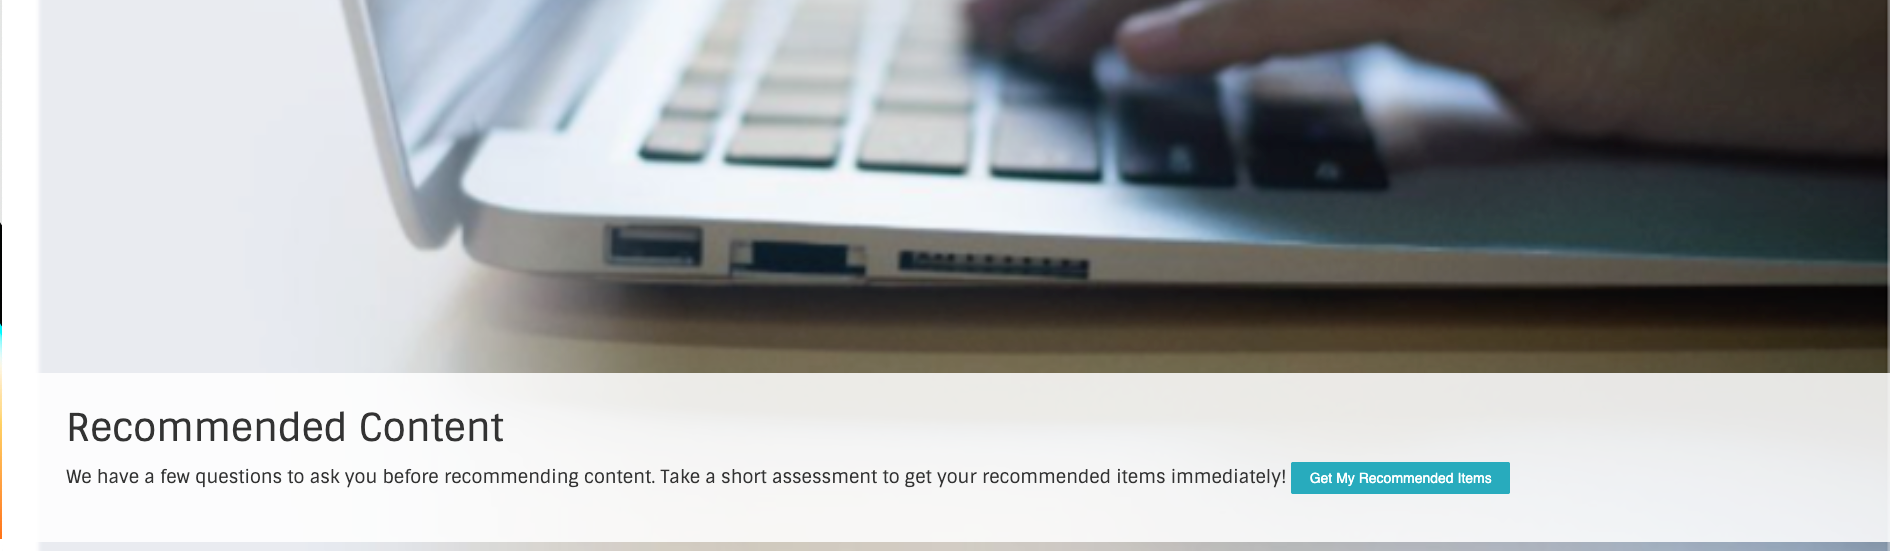 RecommendedContent_AssessmentWidget_LearnerView.png